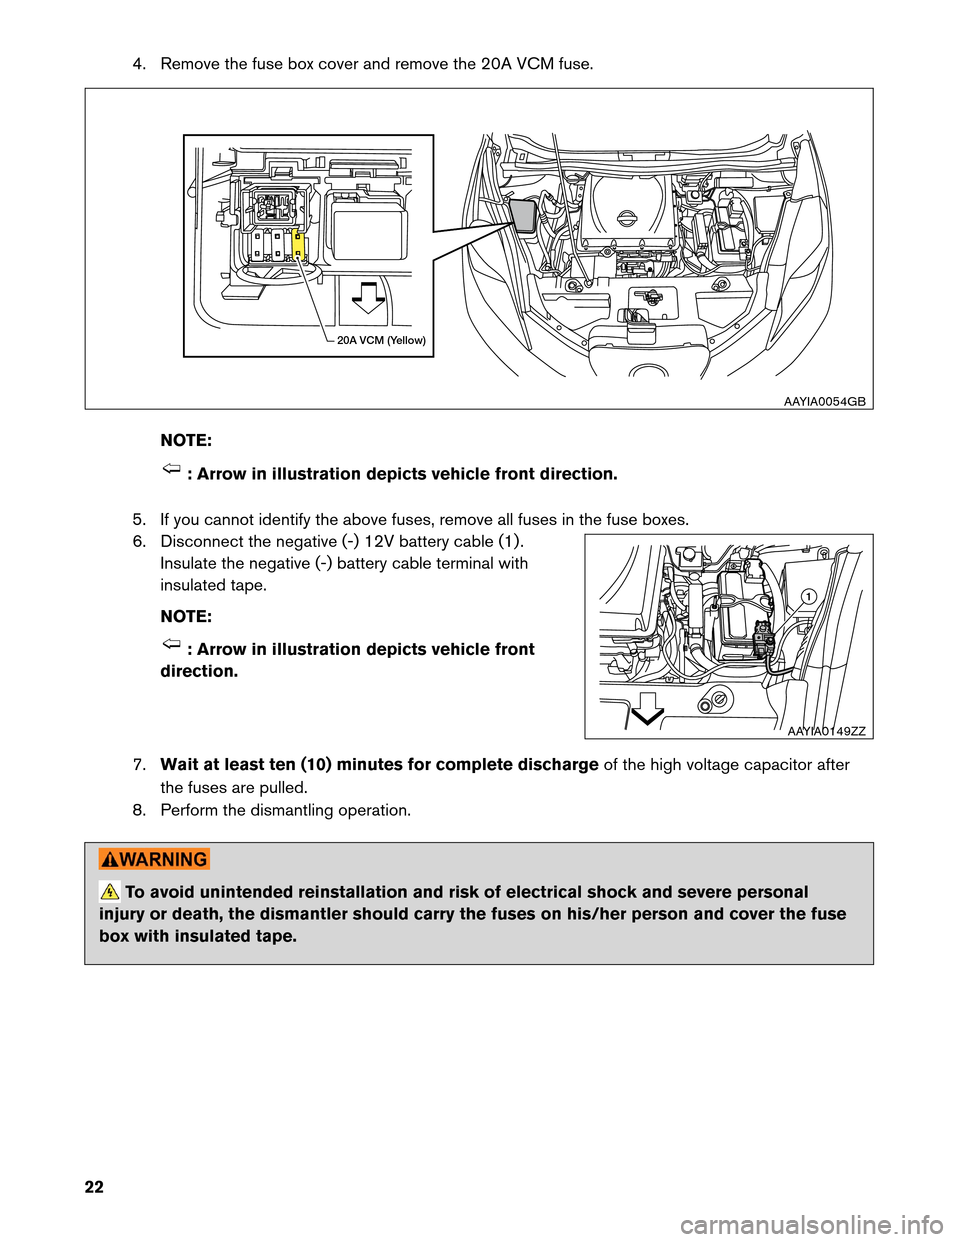 NISSAN LEAF 2013 1.G Dismantling Guide 4. Remove the fuse box cover and remove the 20A VCM fuse.
NO TE: : Arrow in illustration depicts vehicle front direction.
5.

If you cannot identify the above fuses, remove all fuses in the fuse boxes